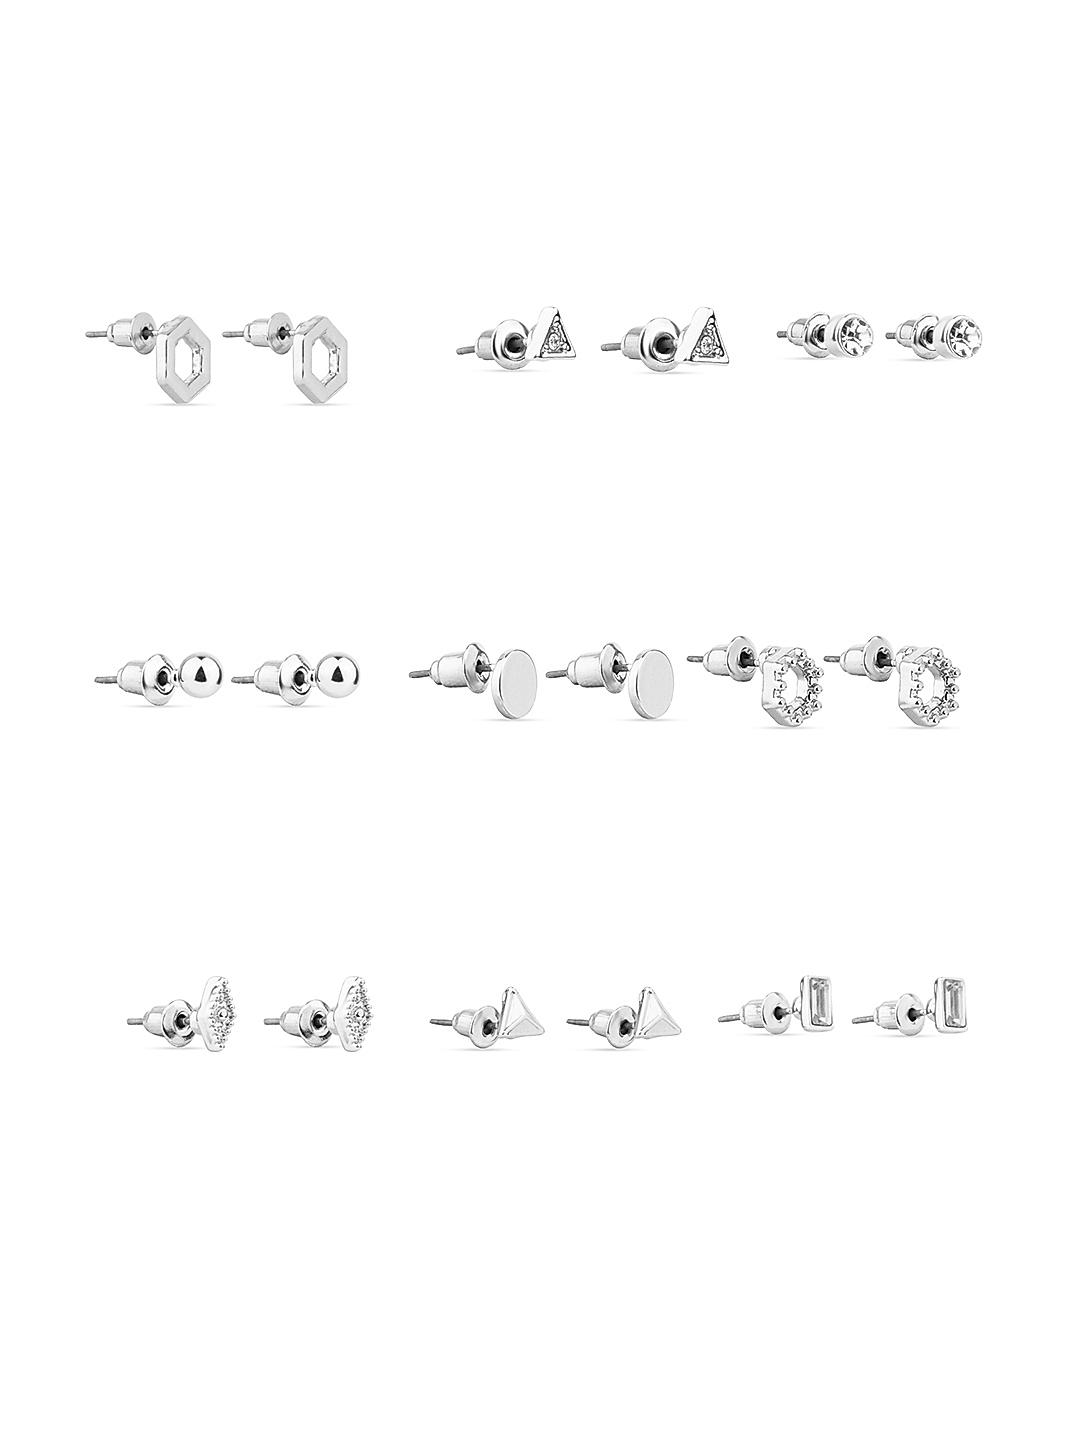 Details more than 182 small silver stud earrings set latest